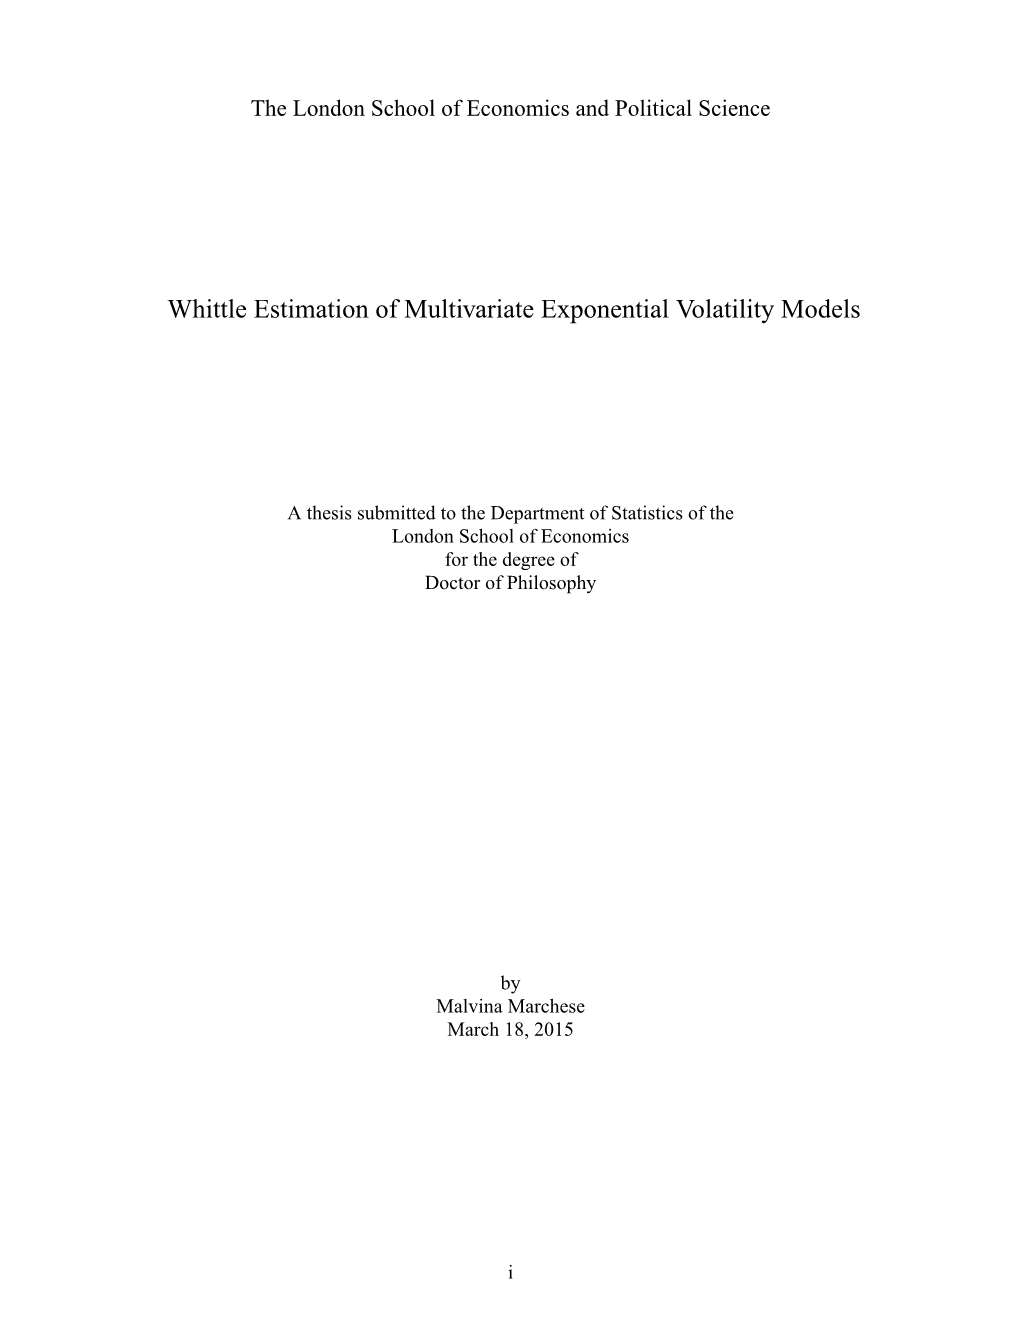 Whittle Estimation of Multivariate Exponential Volatility Models